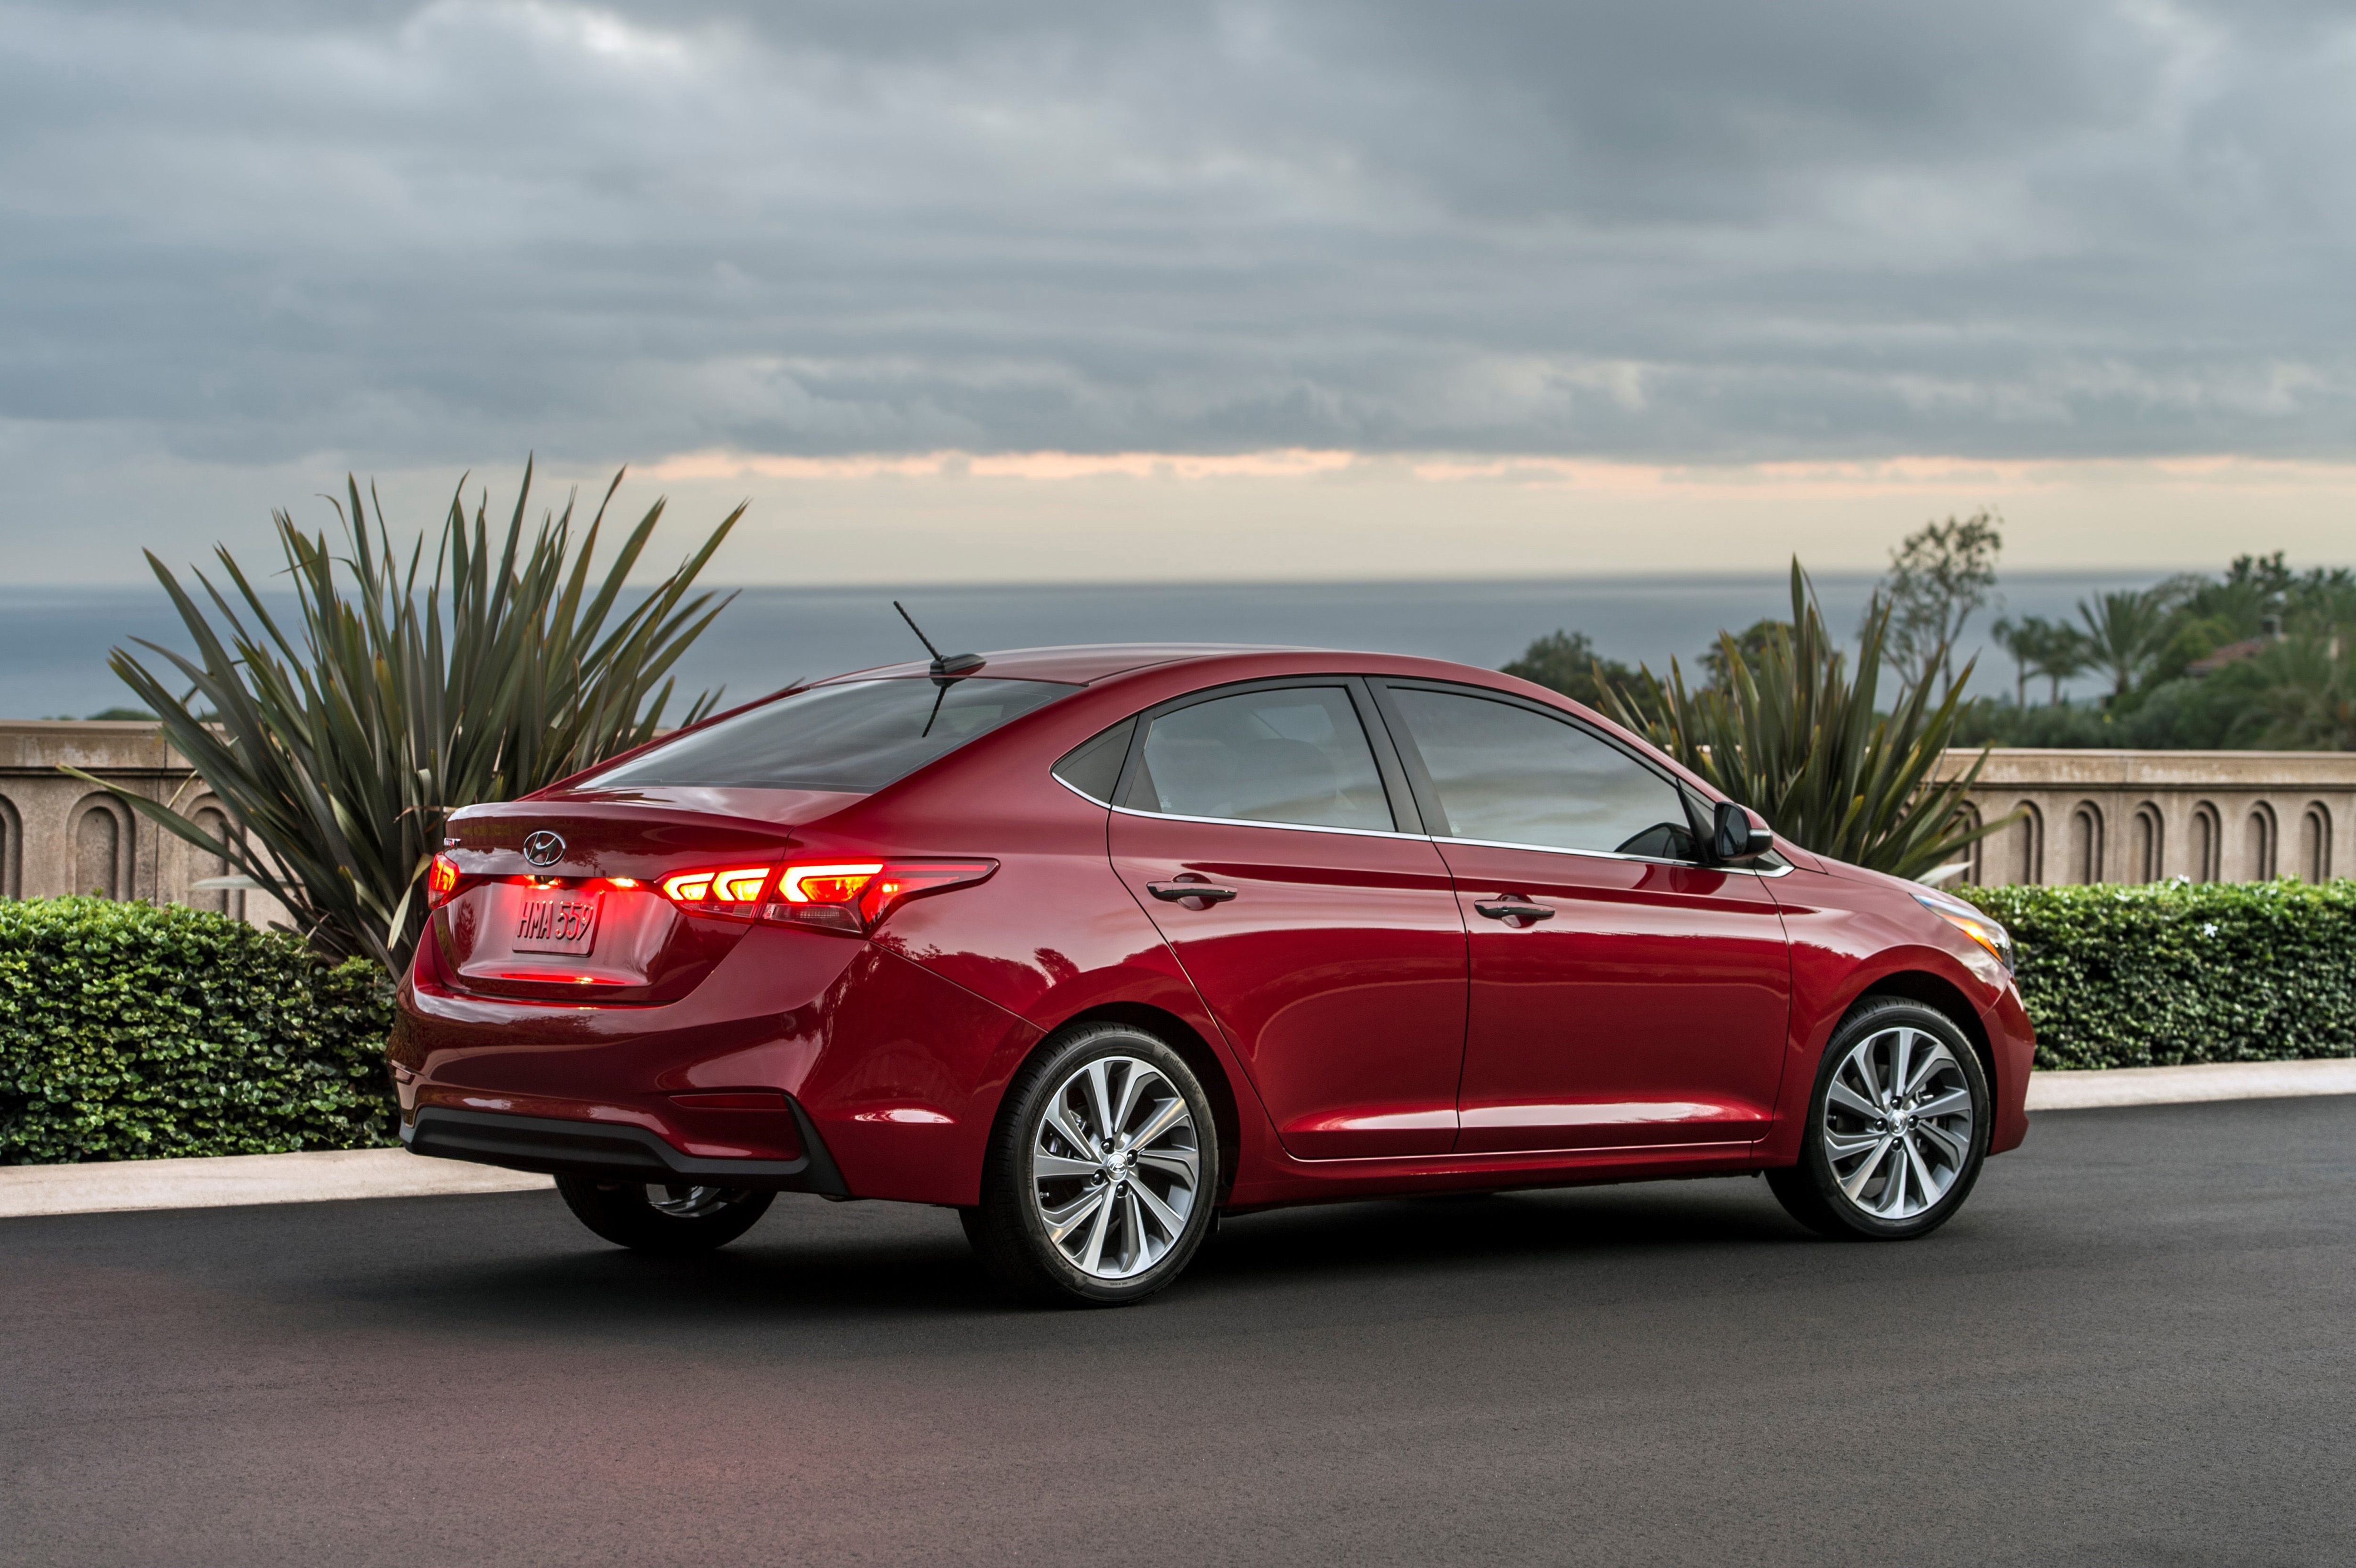 2020 Hyundai Accent Review, Pricing, and Specs